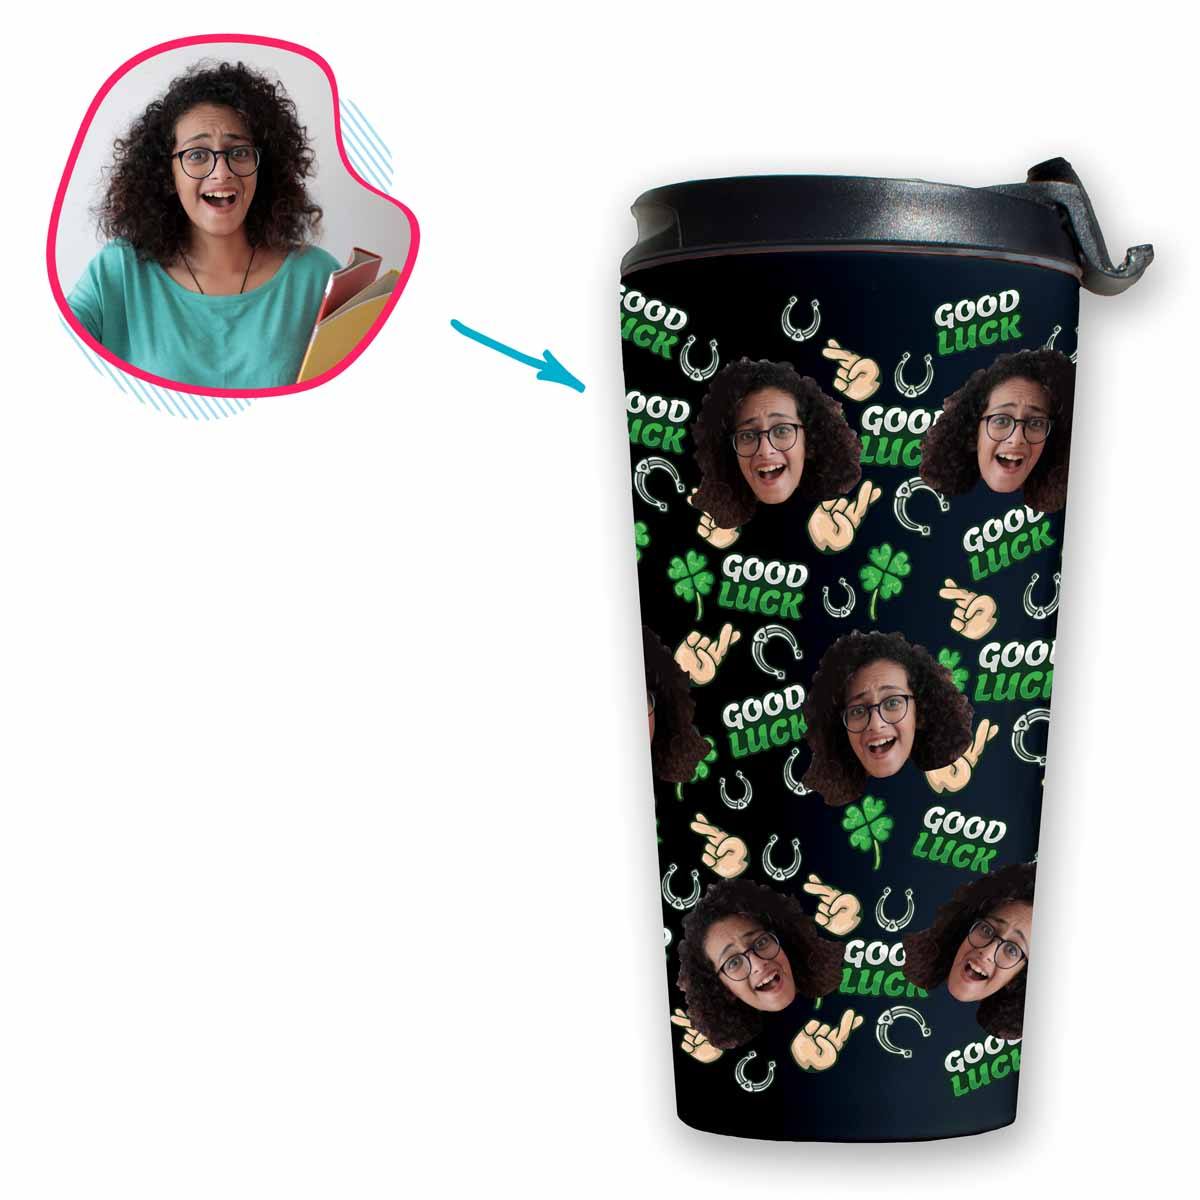 Dark Good Luck personalized travel mug with photo of face printed on it